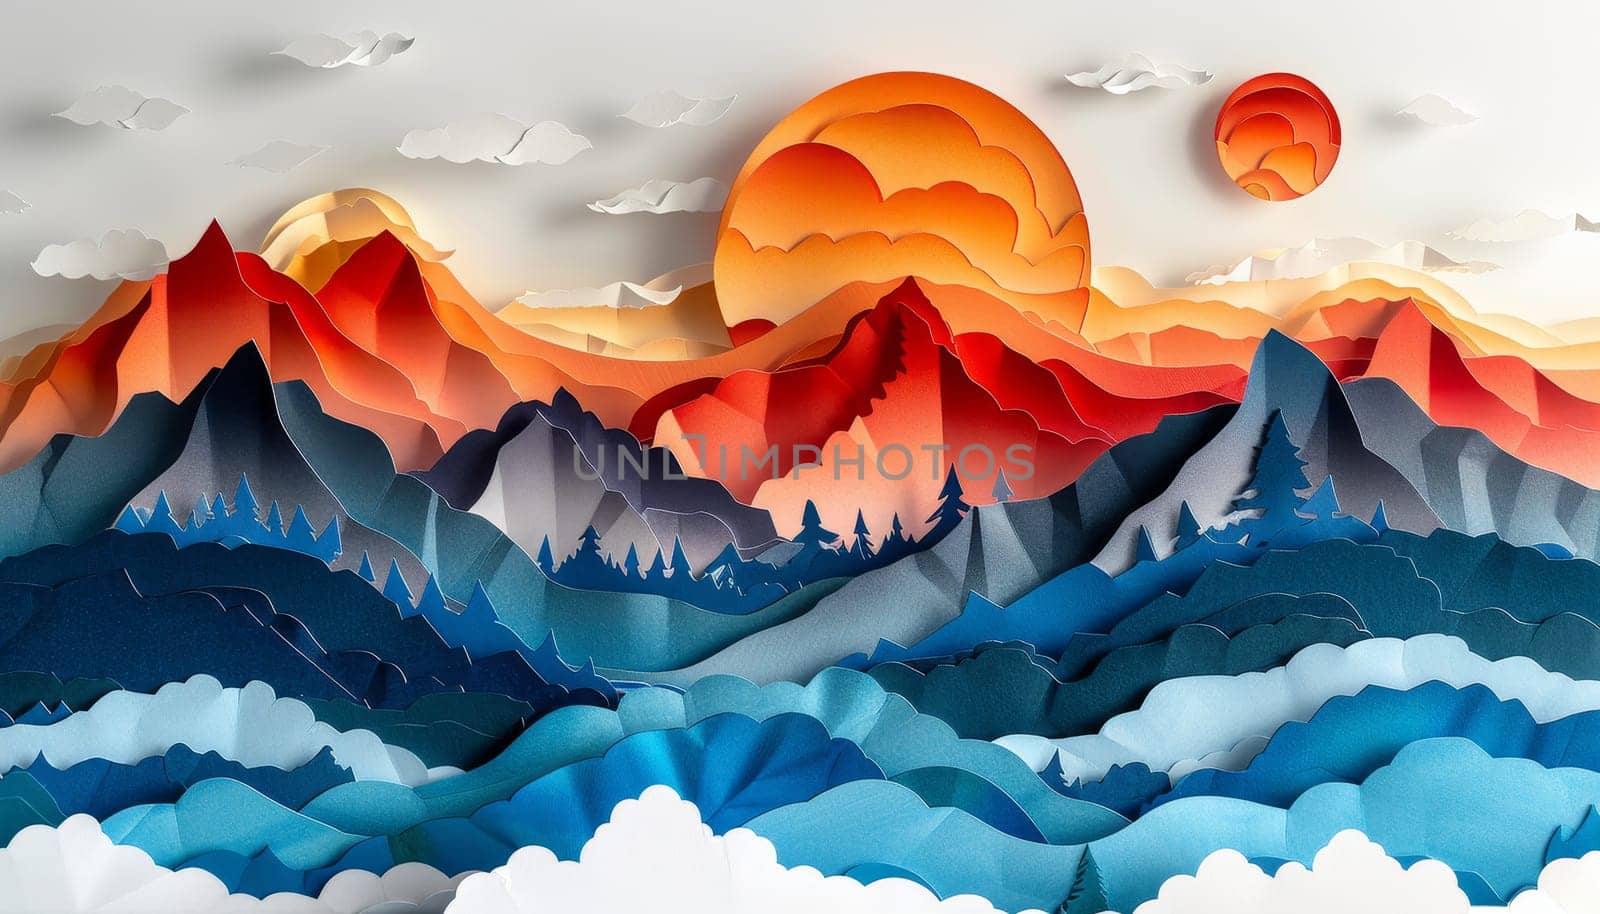 A mountain range with a sun in the sky by AI generated image.